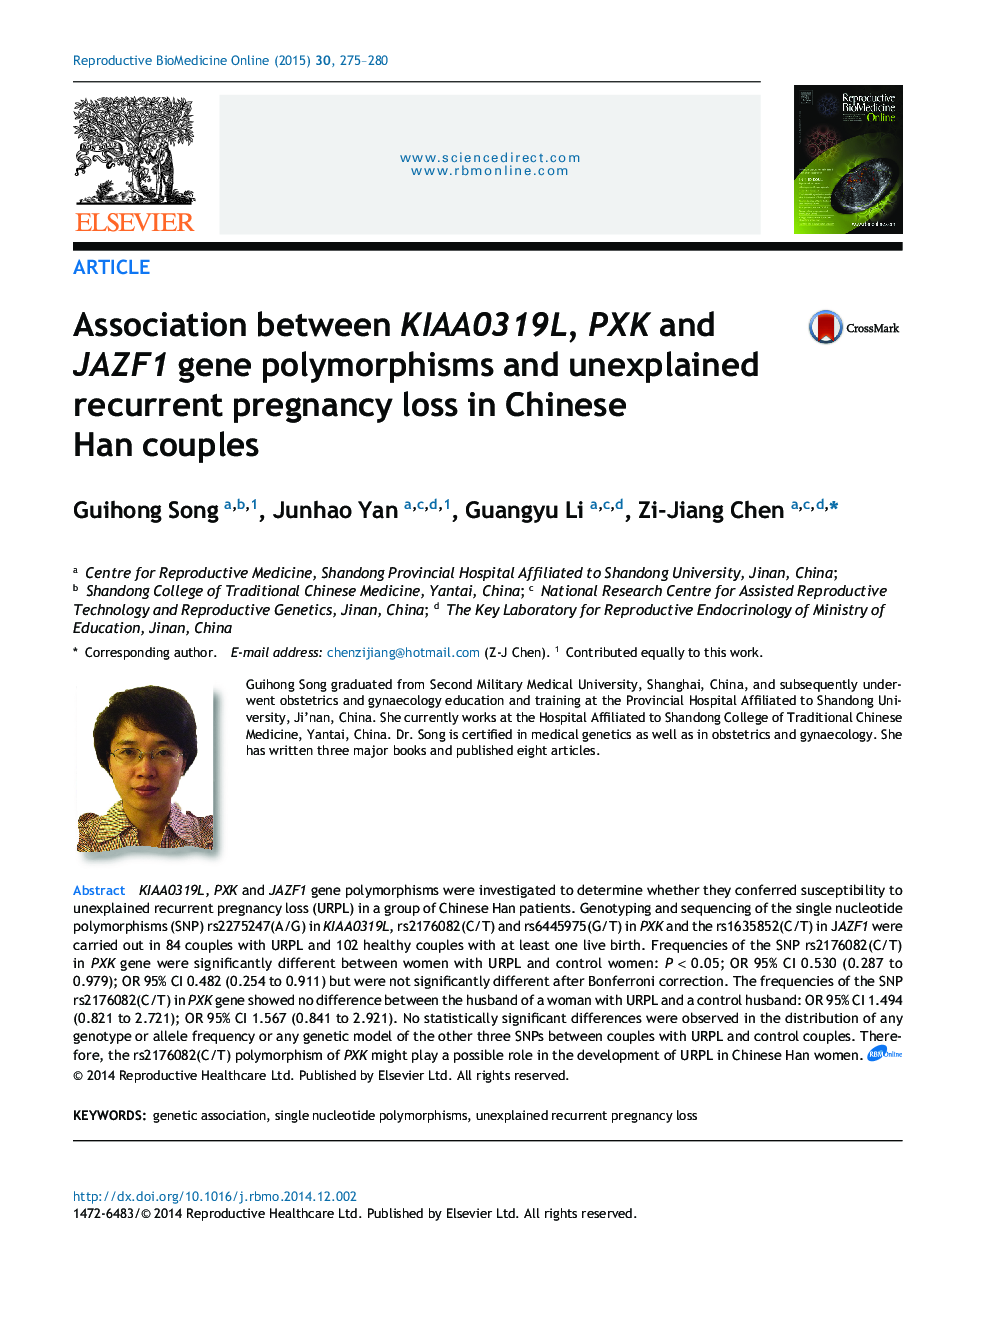 Association between KIAA0319L, PXK and JAZF1 gene polymorphisms and unexplained recurrent pregnancy loss in Chinese Han couples